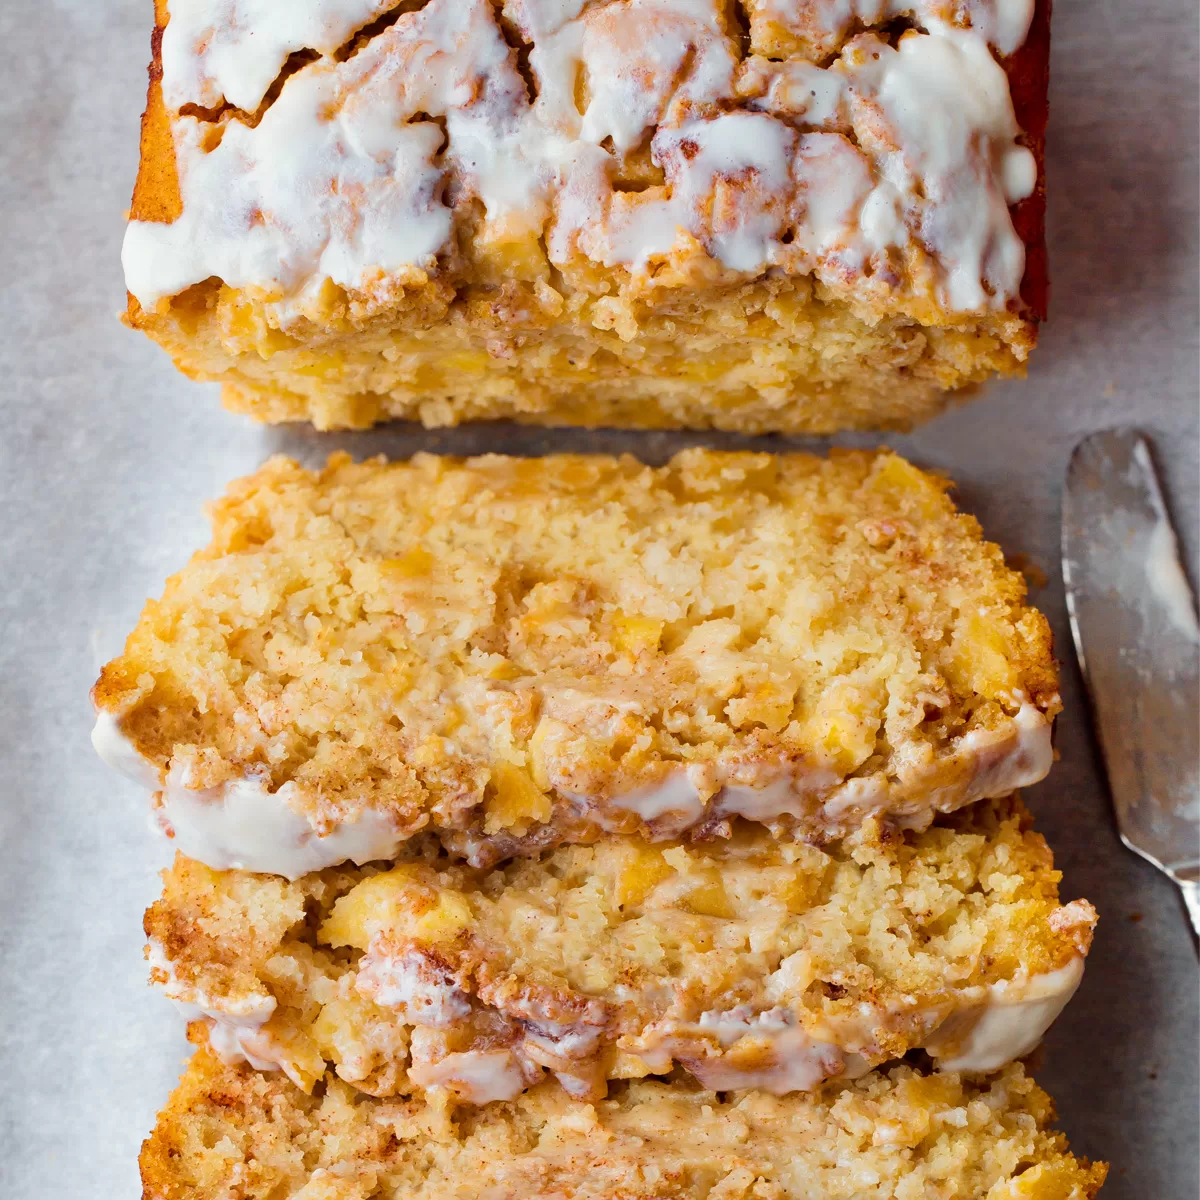 Spiced apple and carrot mini loaves